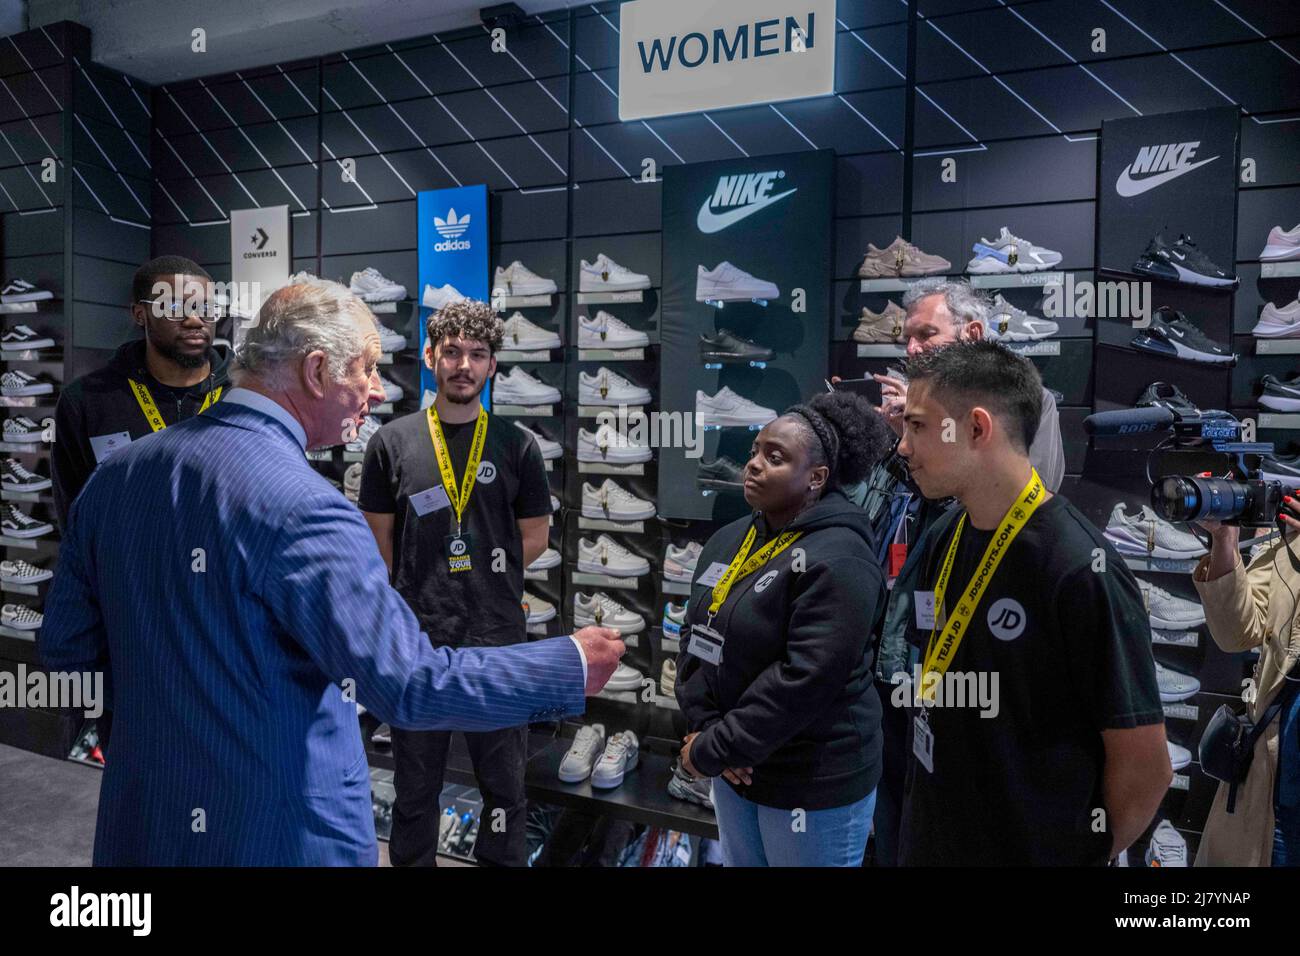 The Prince of Wales during a visit to a JD Sports store on Walworth High to meet with young people supported by The Prince's Trust through the UK Government's Kickstart Scheme.